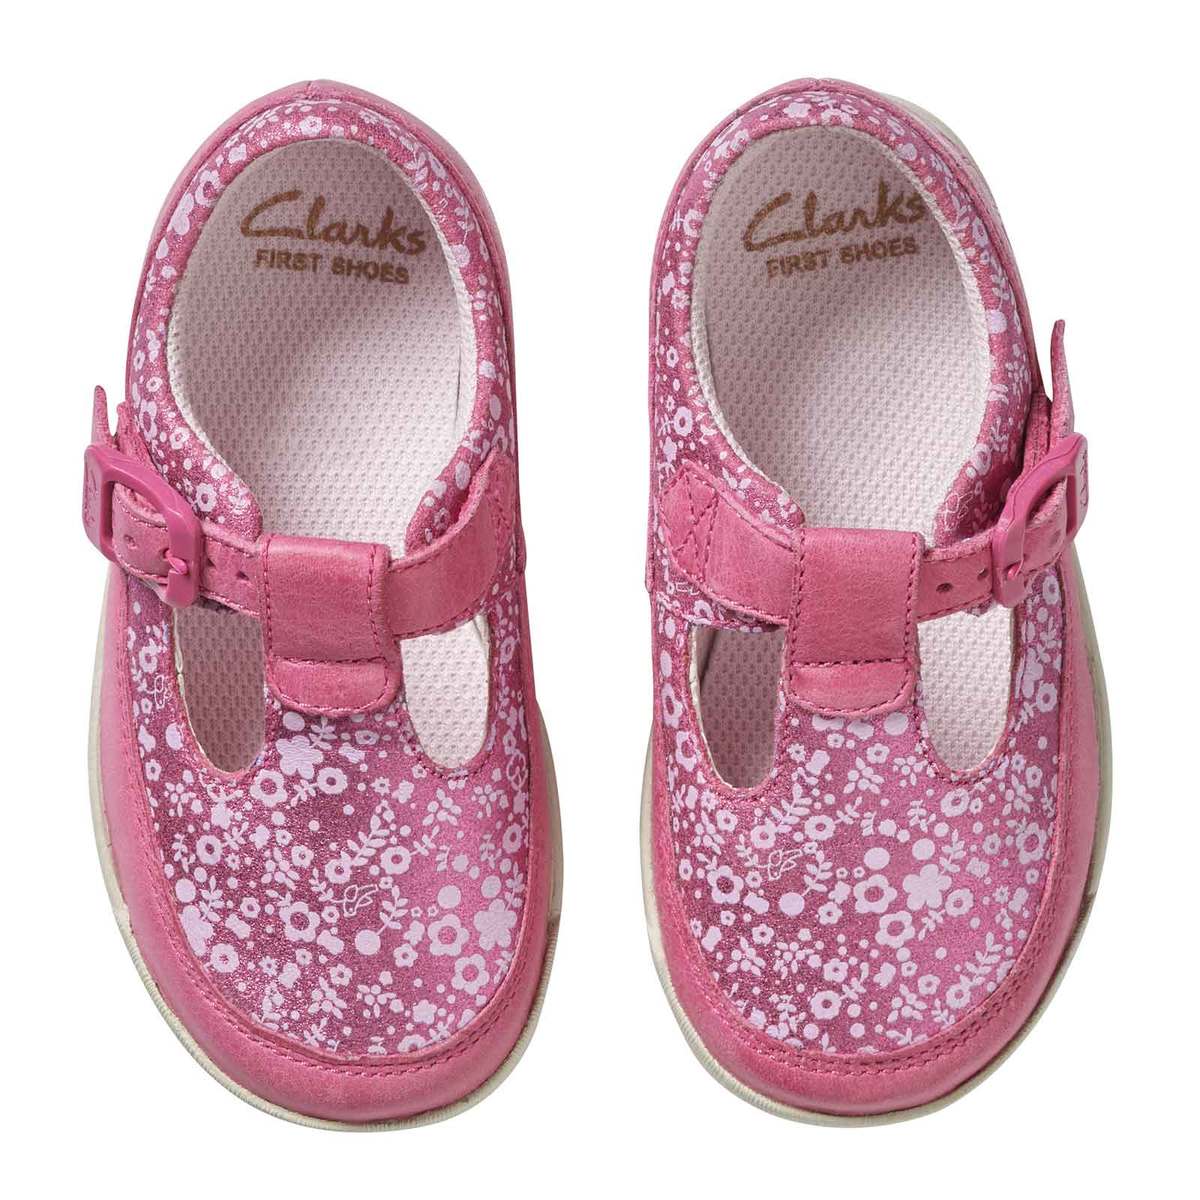 Buy clarks shoes kids pink cheap,up to 